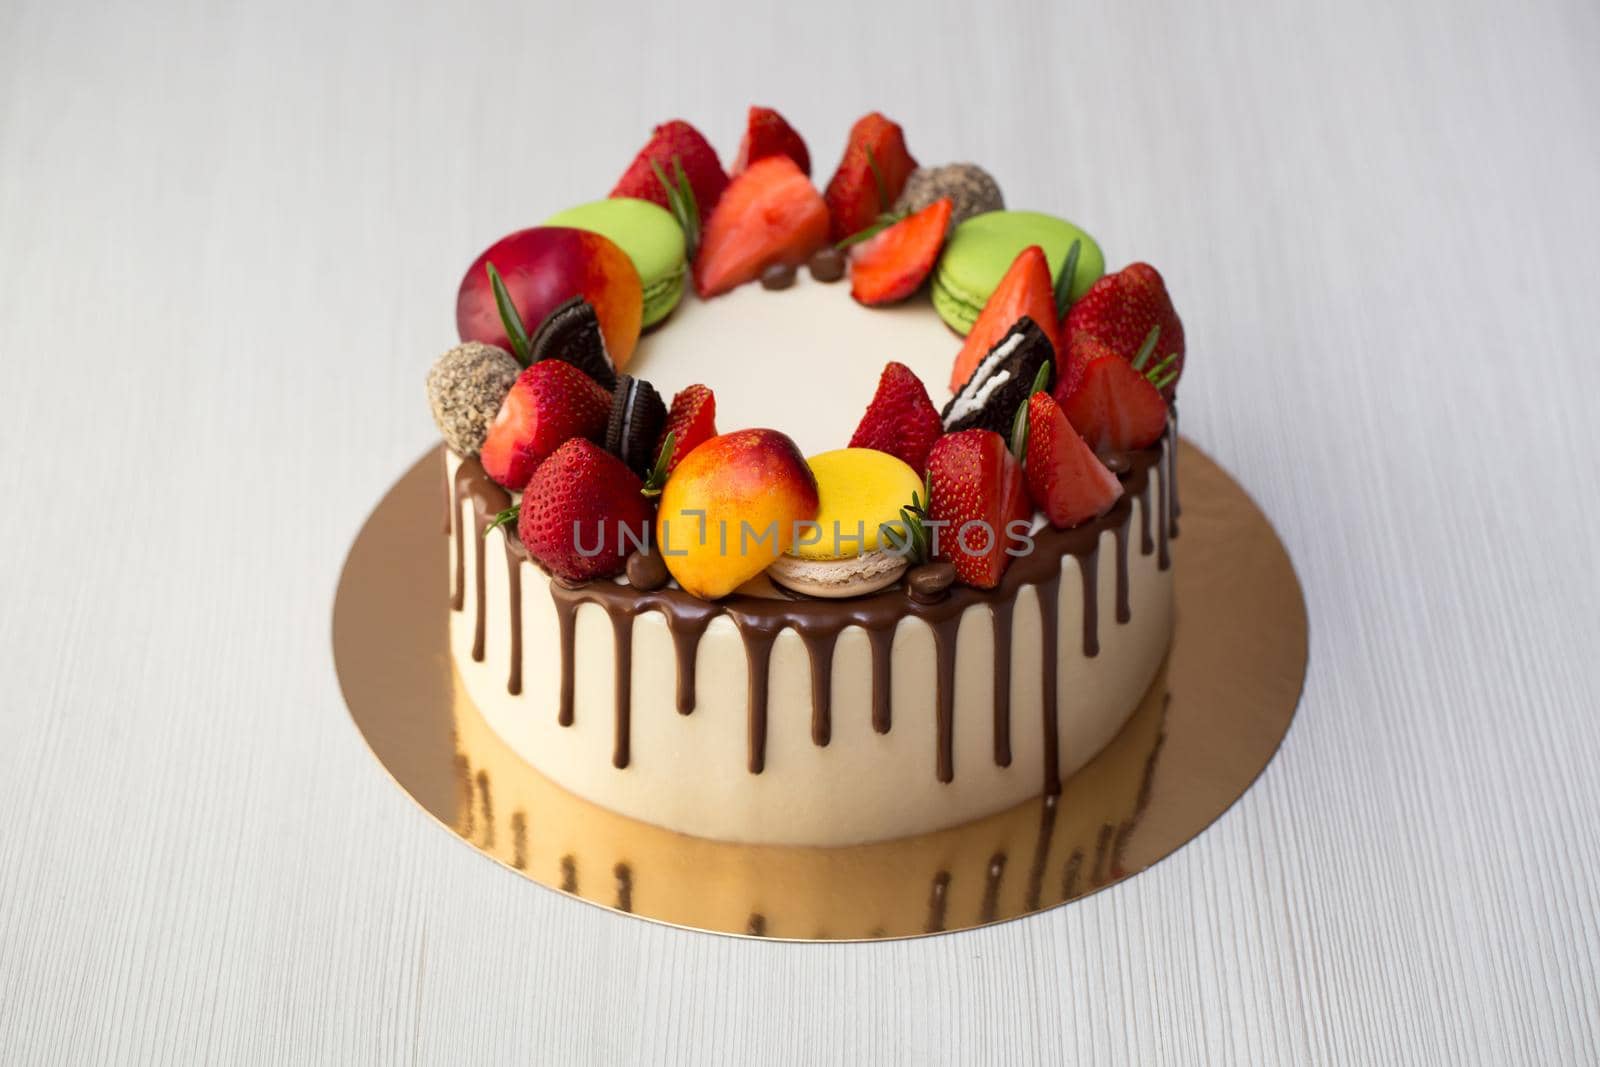 Cake with chocolate drips, strawberries, peaches, macaroons, rosemary. by StudioPeace